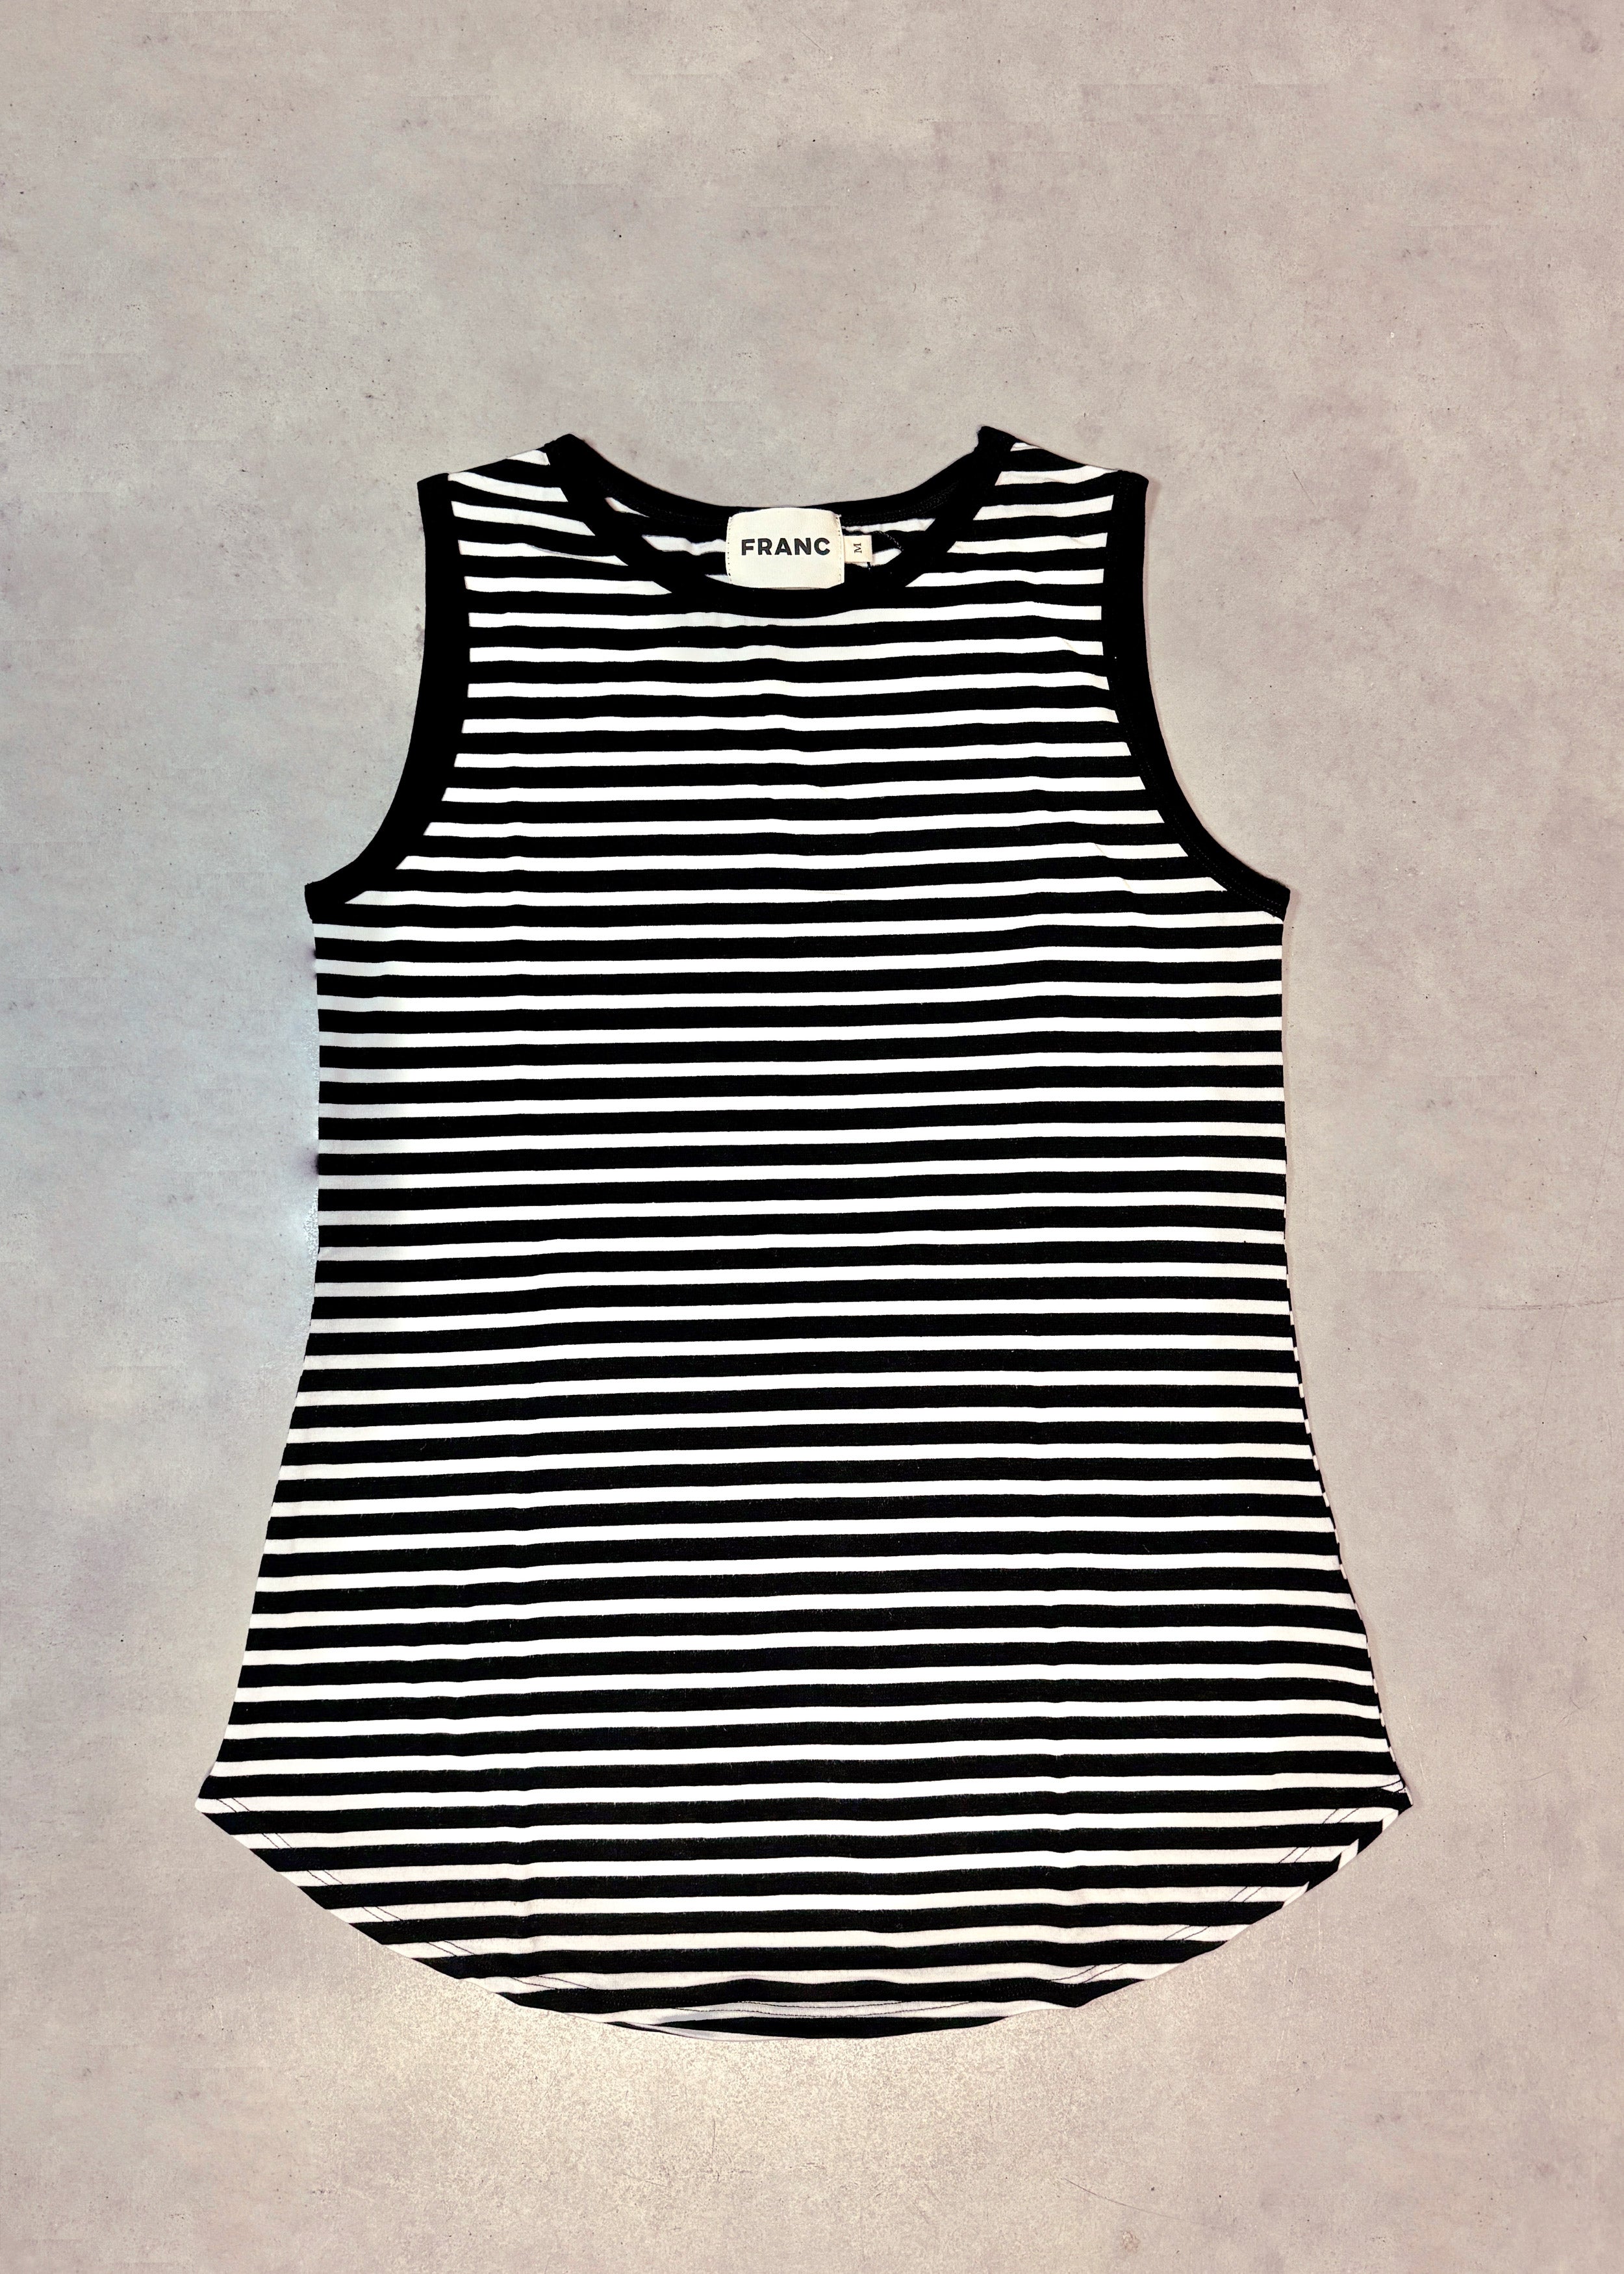 Highneck Tank Top | FRANC Sustainable Clothing